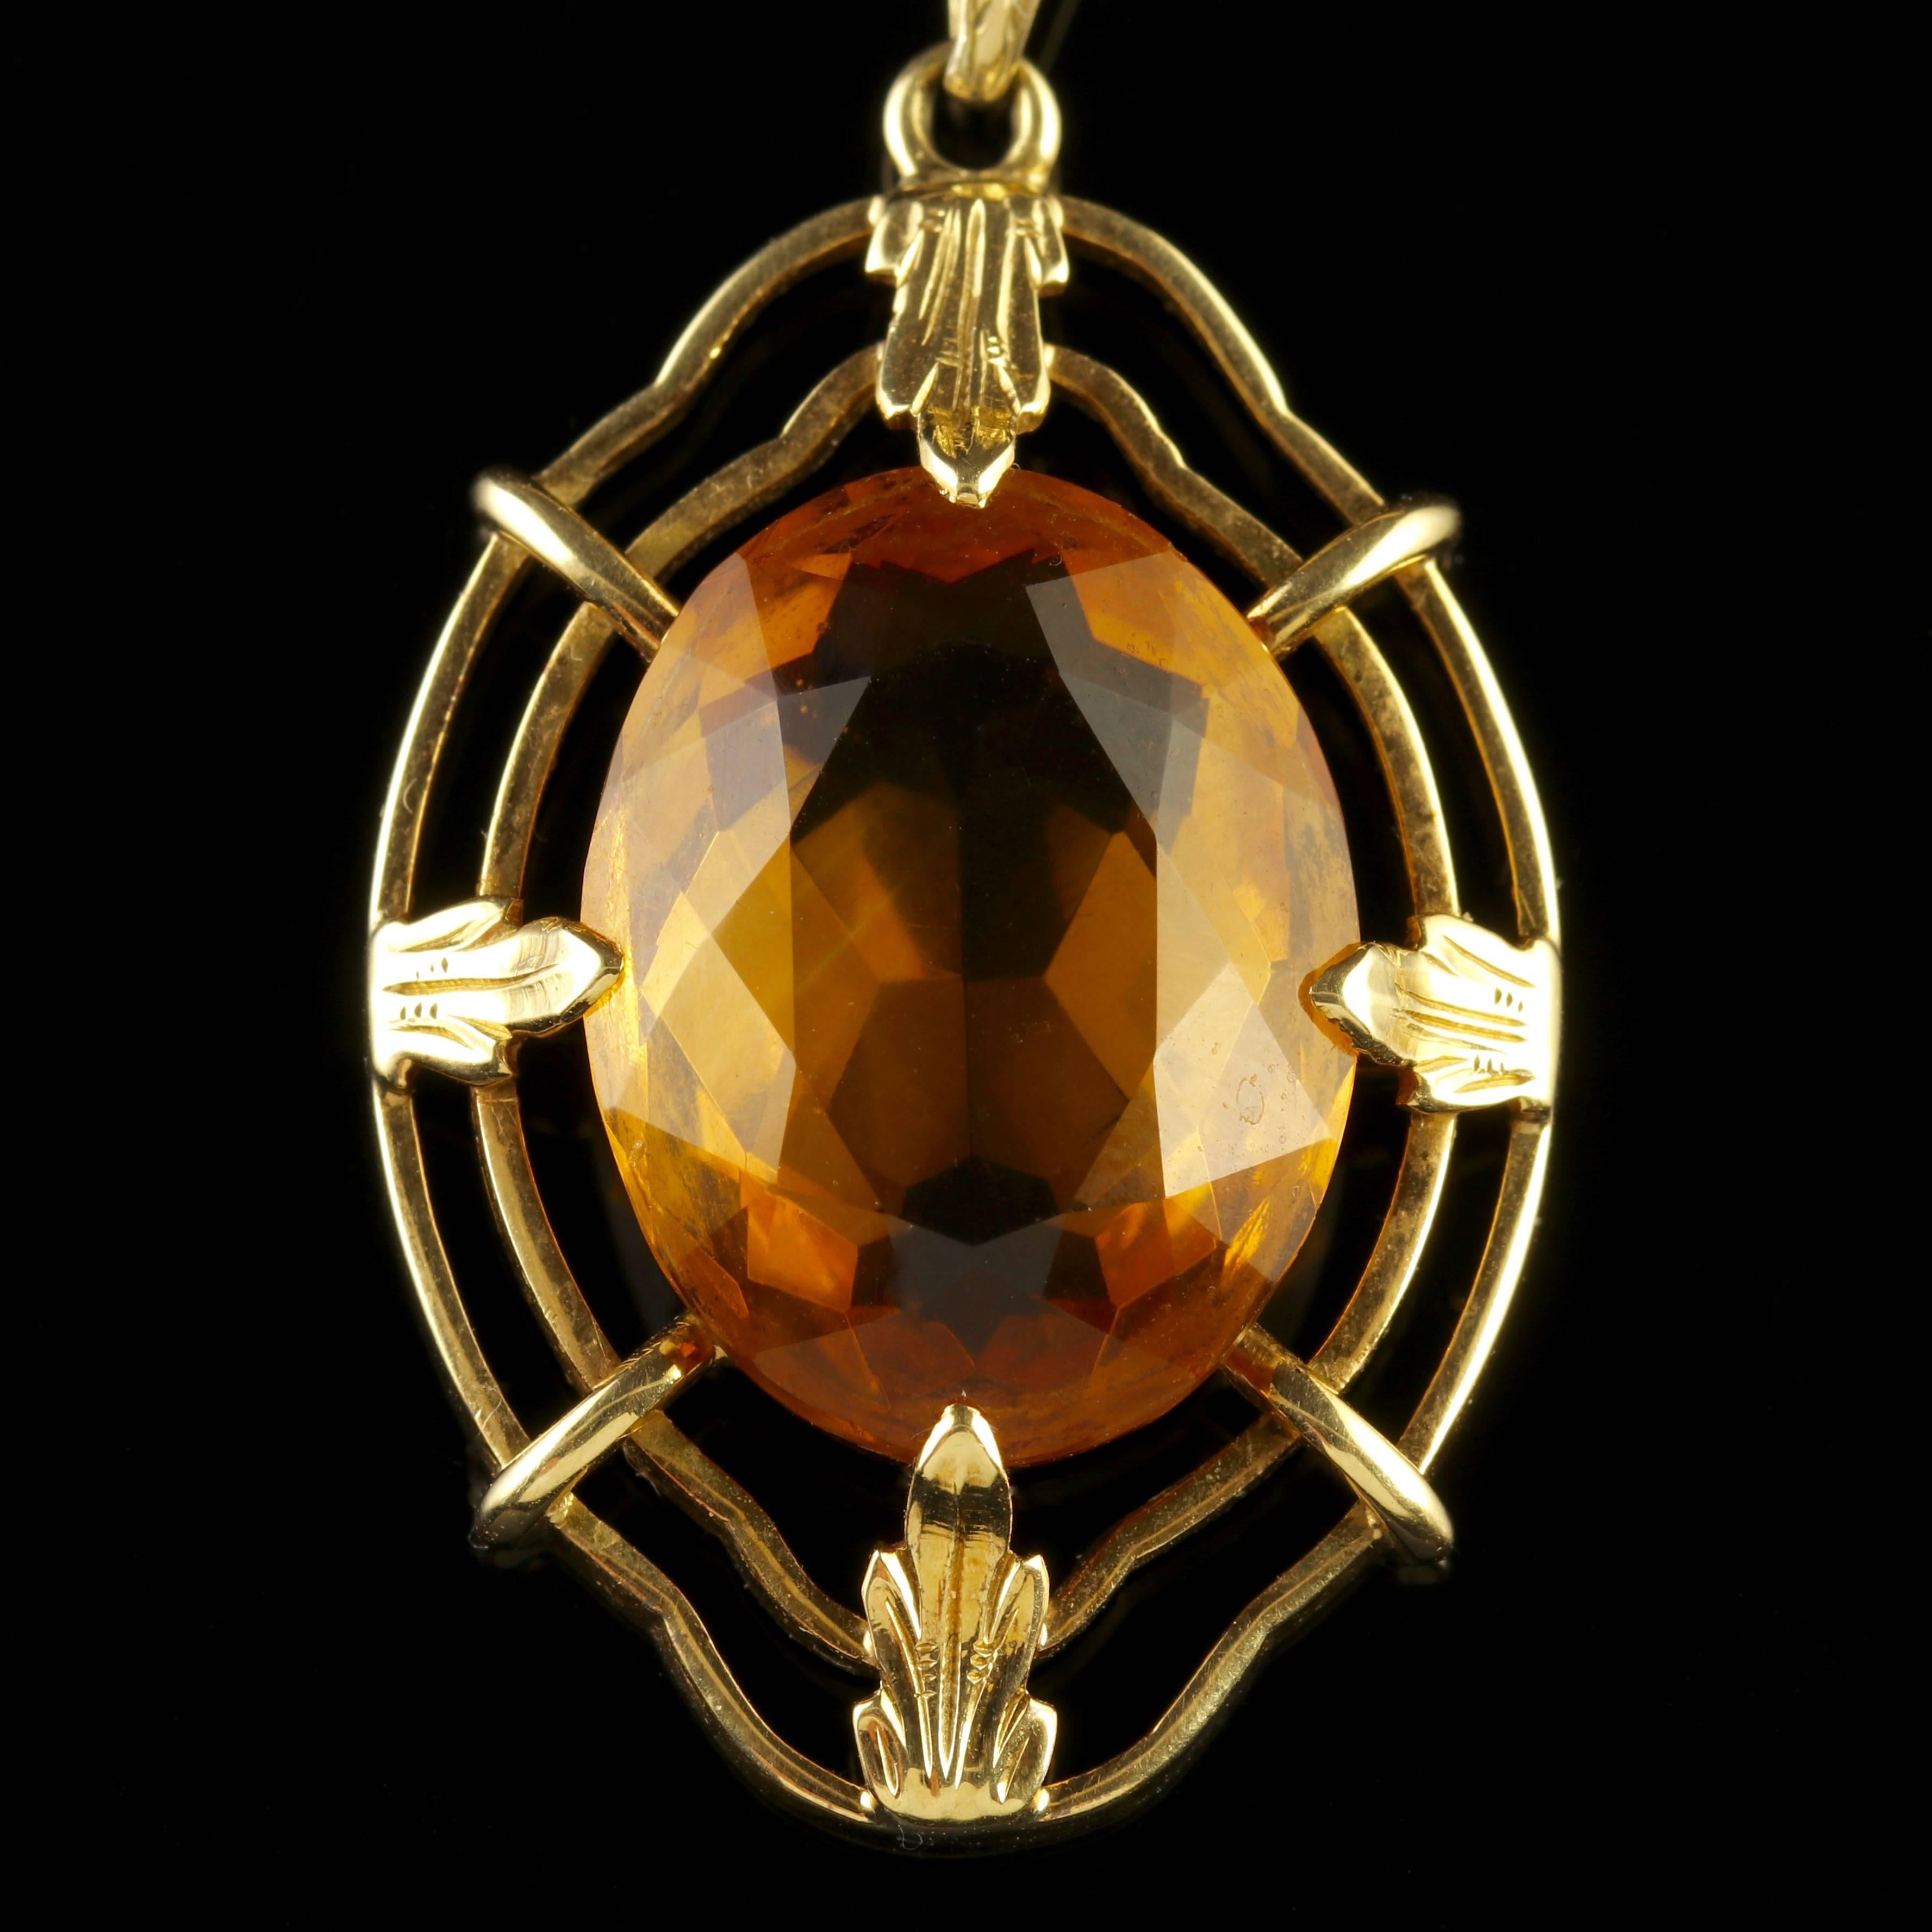 This beautiful 14ct Yellow Gold pendant and chain is circa 1950.

The stunning pendant is set with a large 12ct Citrine in the centre. 

Citrine’s sparkle and have a crisp, radiant quality about them. 

The name Citrine is derived from the colour -